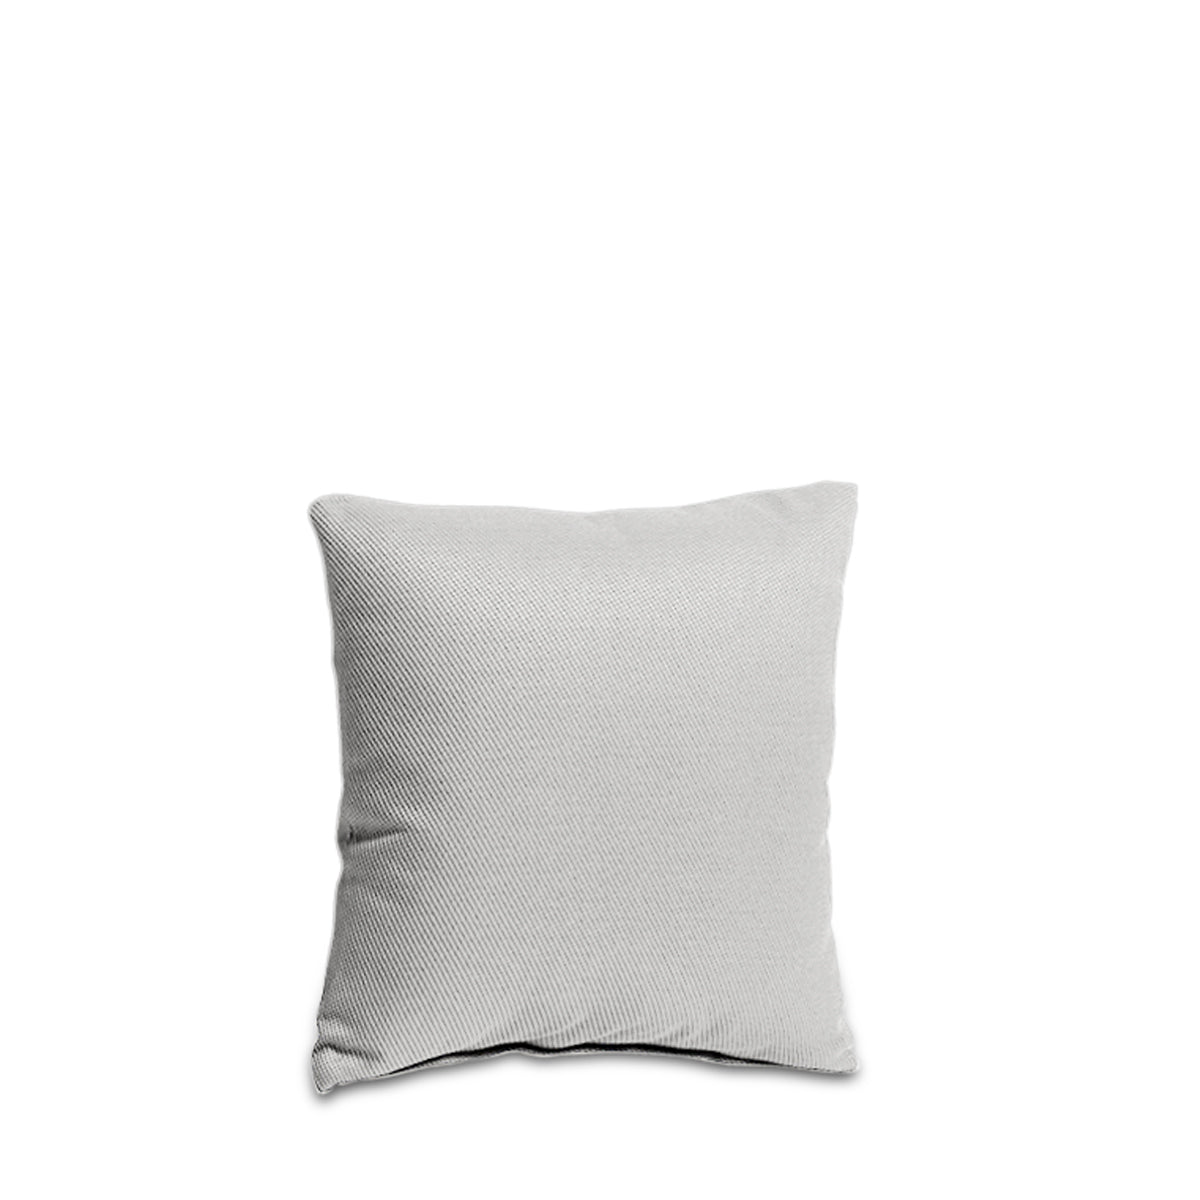 that's living outdoor small decorative outdoor pillows cream outdoor cushions 